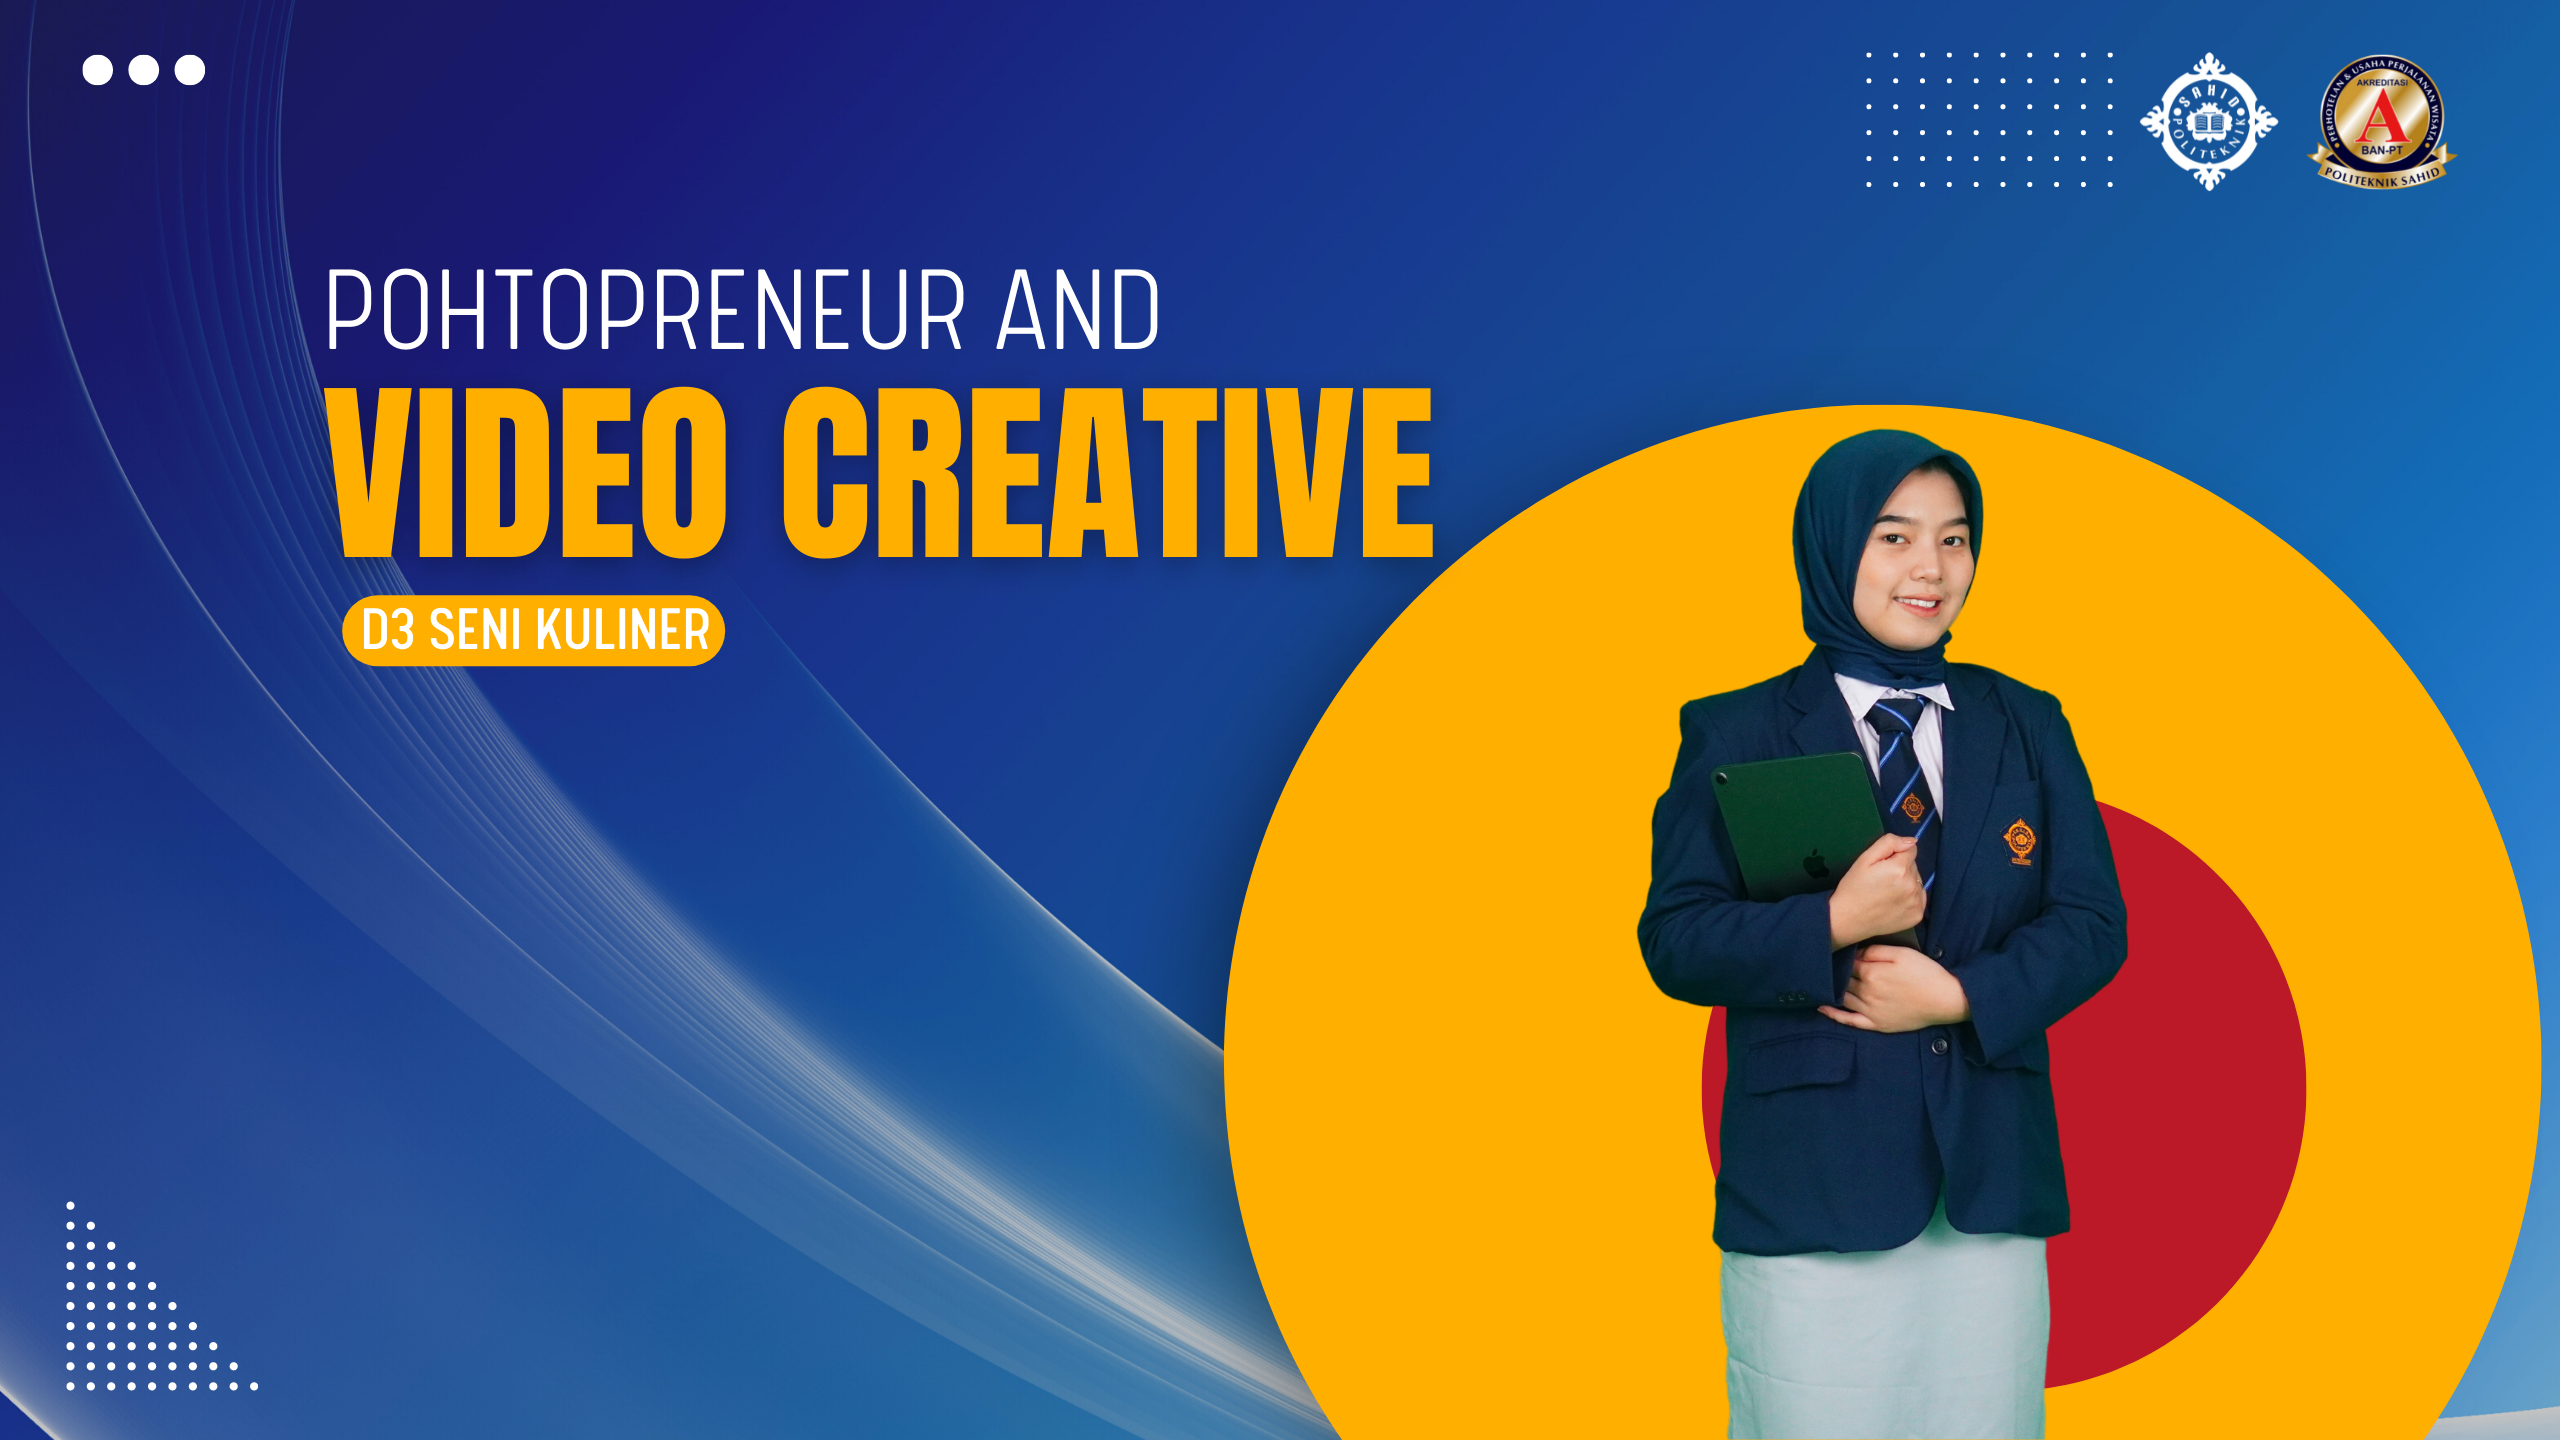 PHOTOPRENEUR AND VIDEO CREATIVE